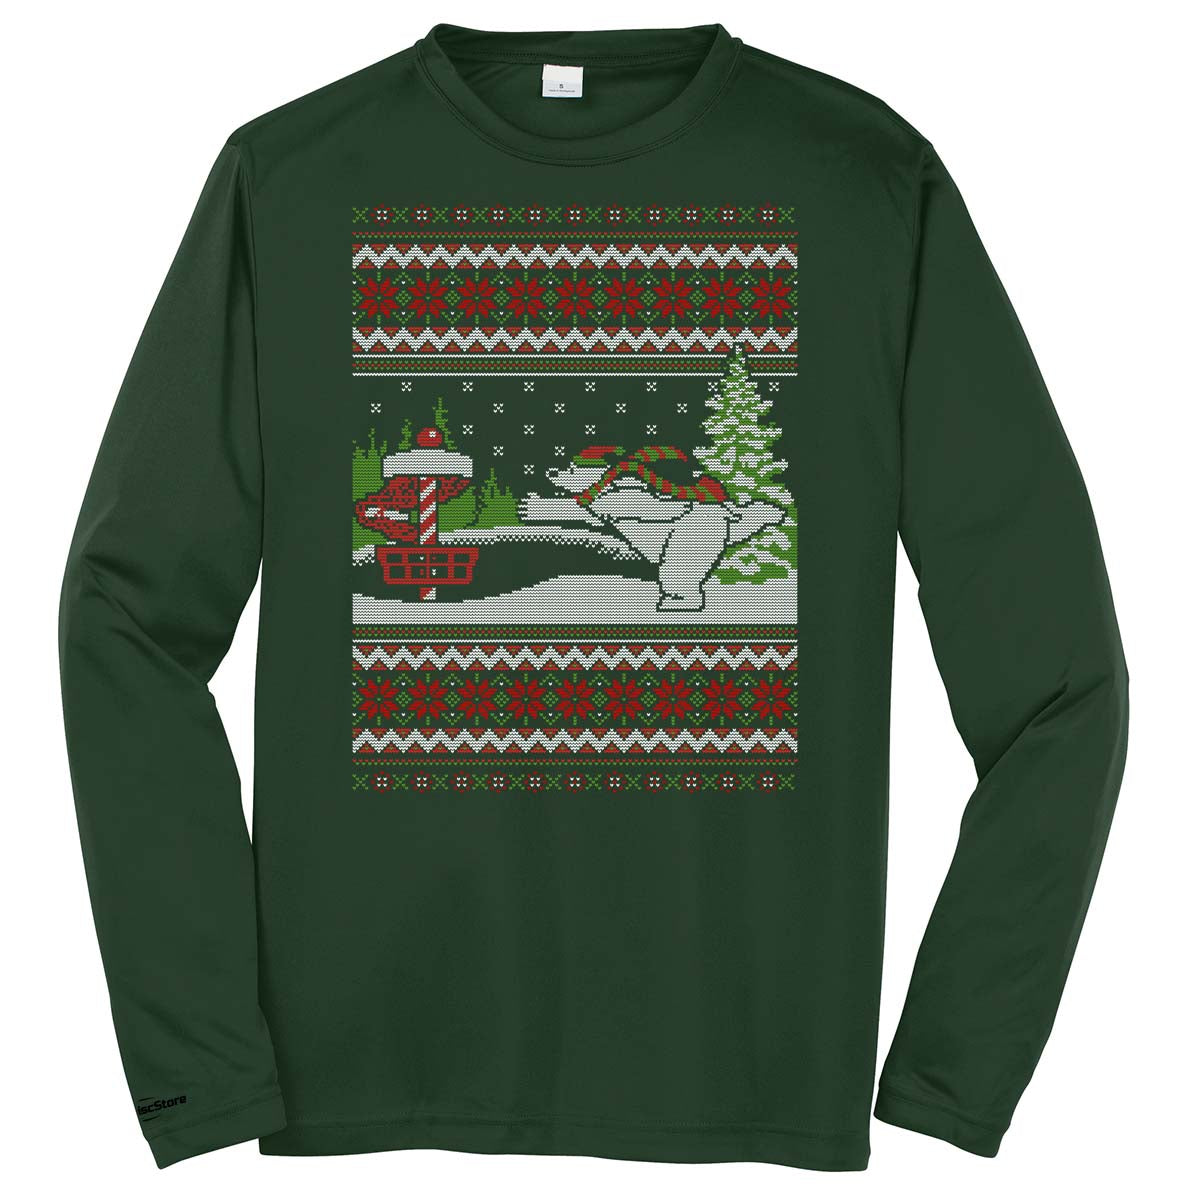 Disc Golf Bear Ugly Sweater Dry Fit